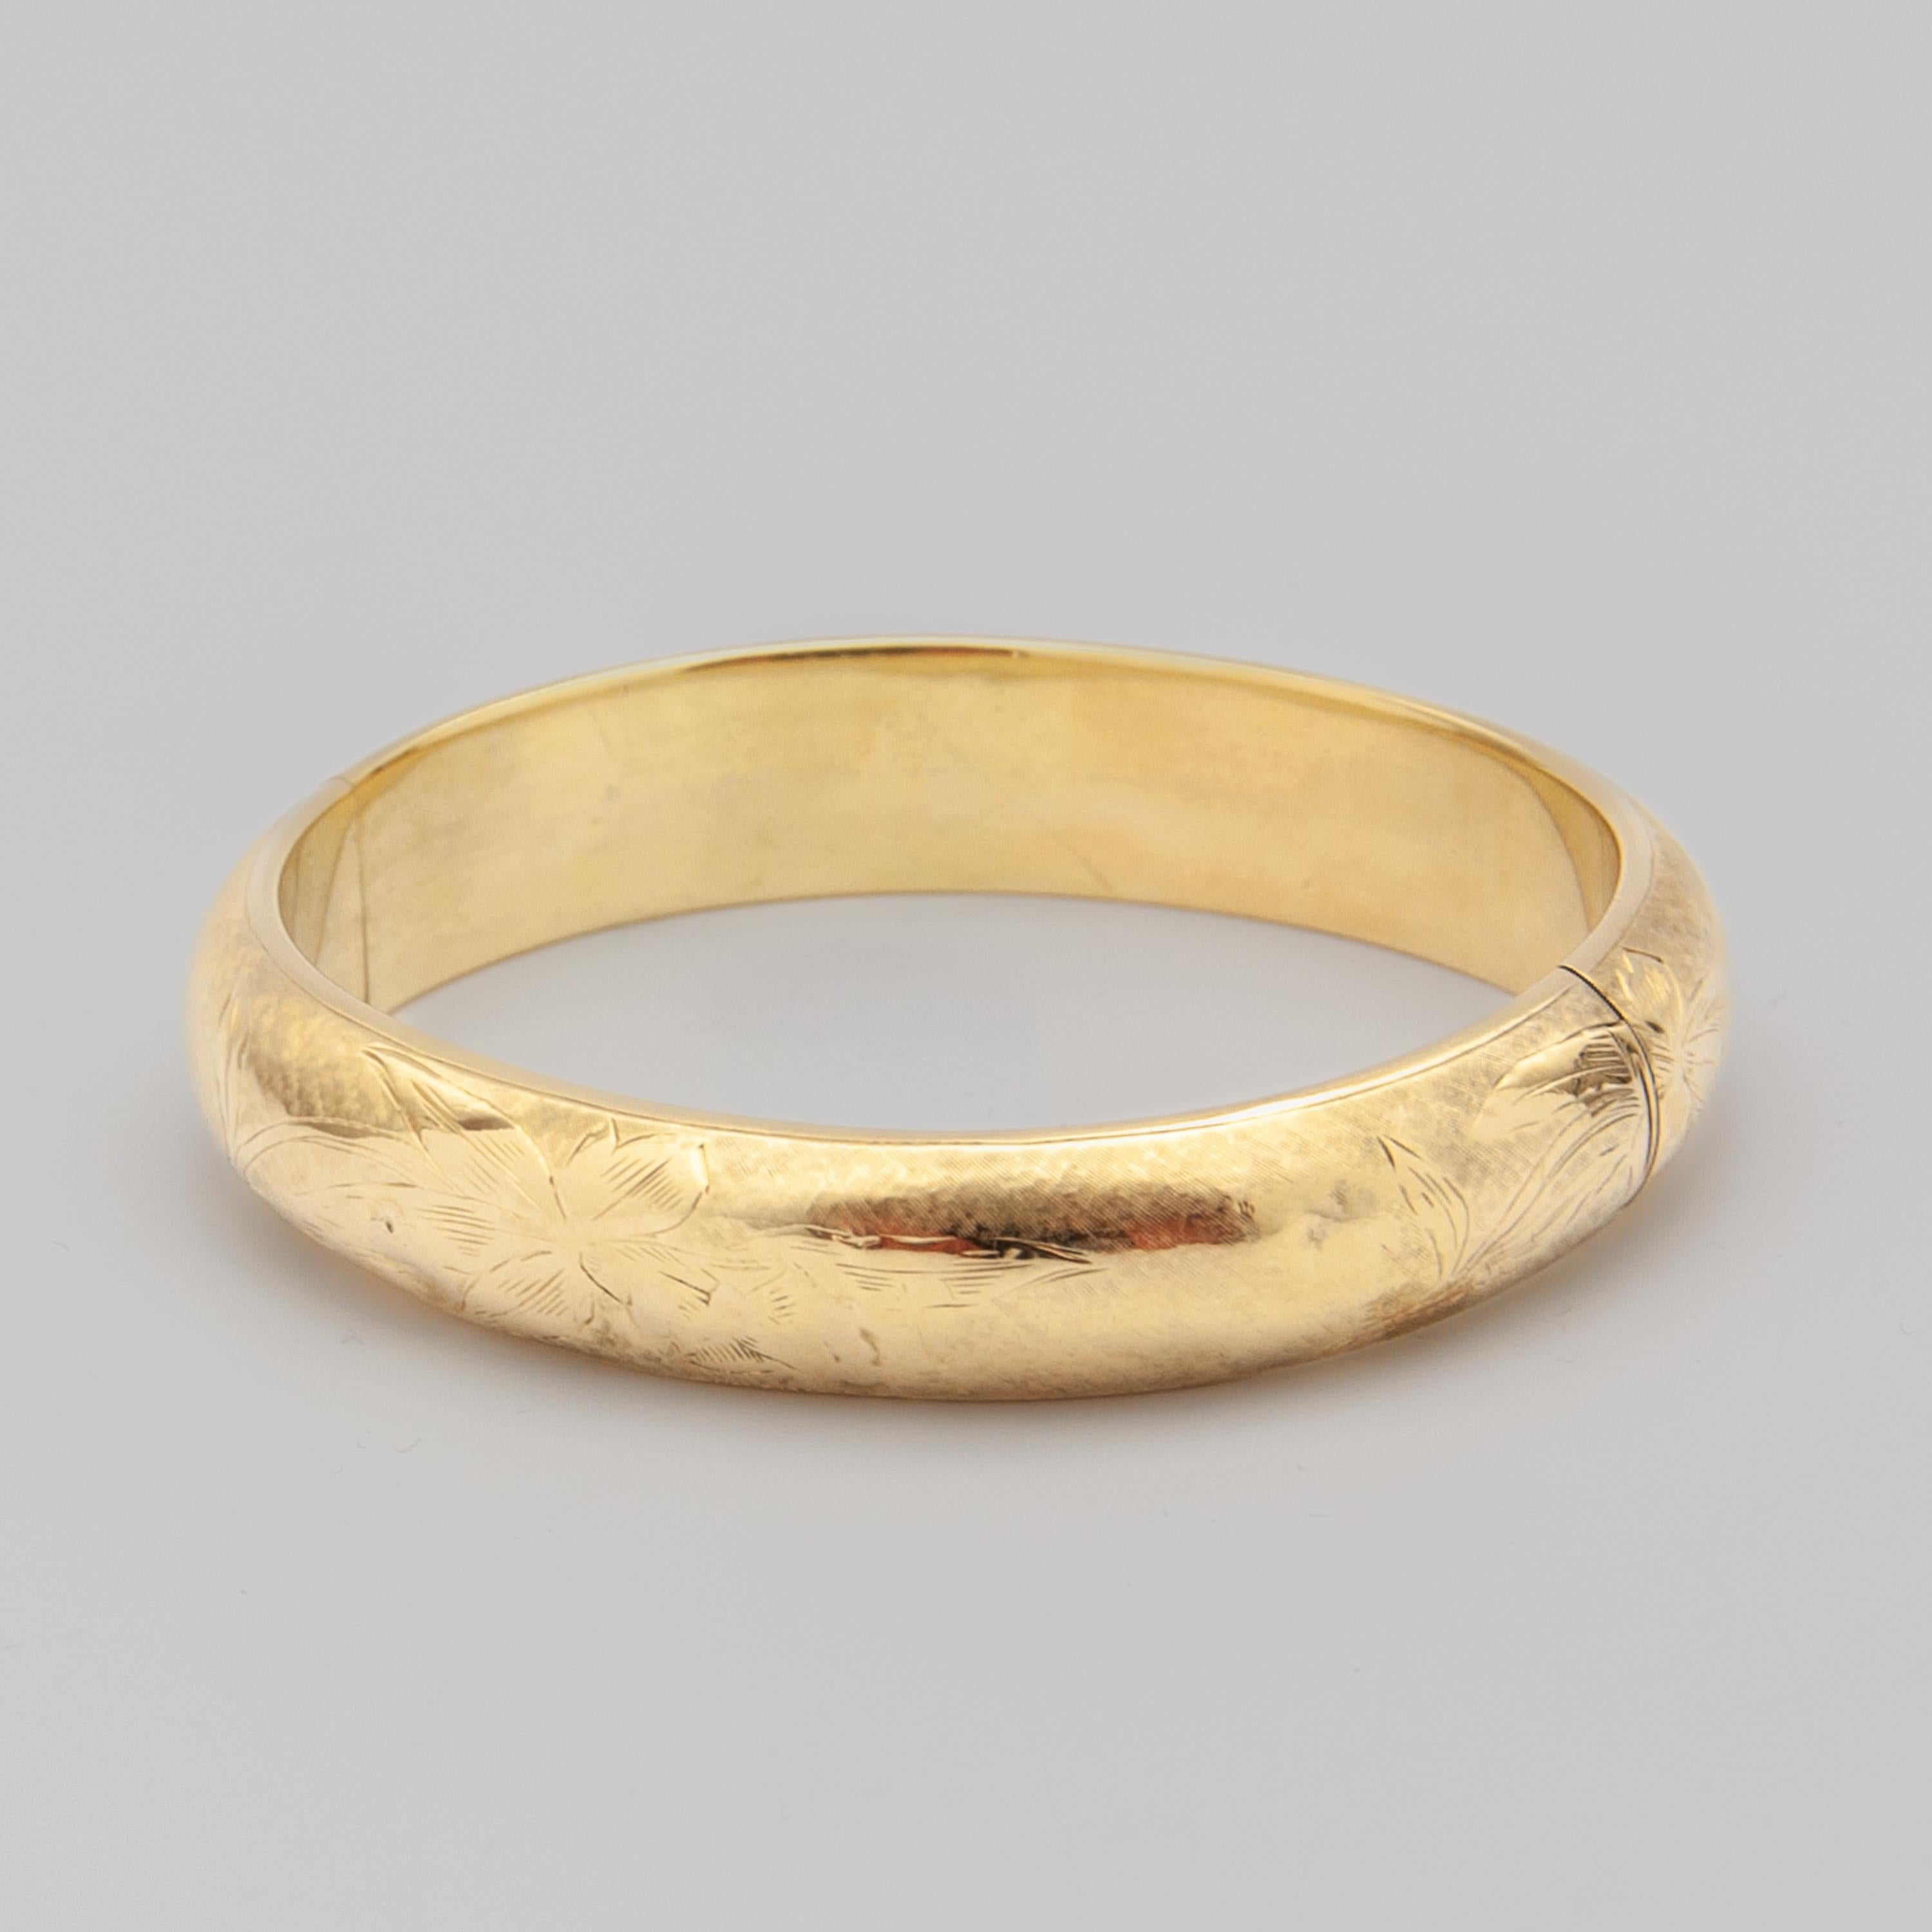 14K Gold Floral Engraved Bangle Bracelet In Fair Condition For Sale In Rotterdam, NL